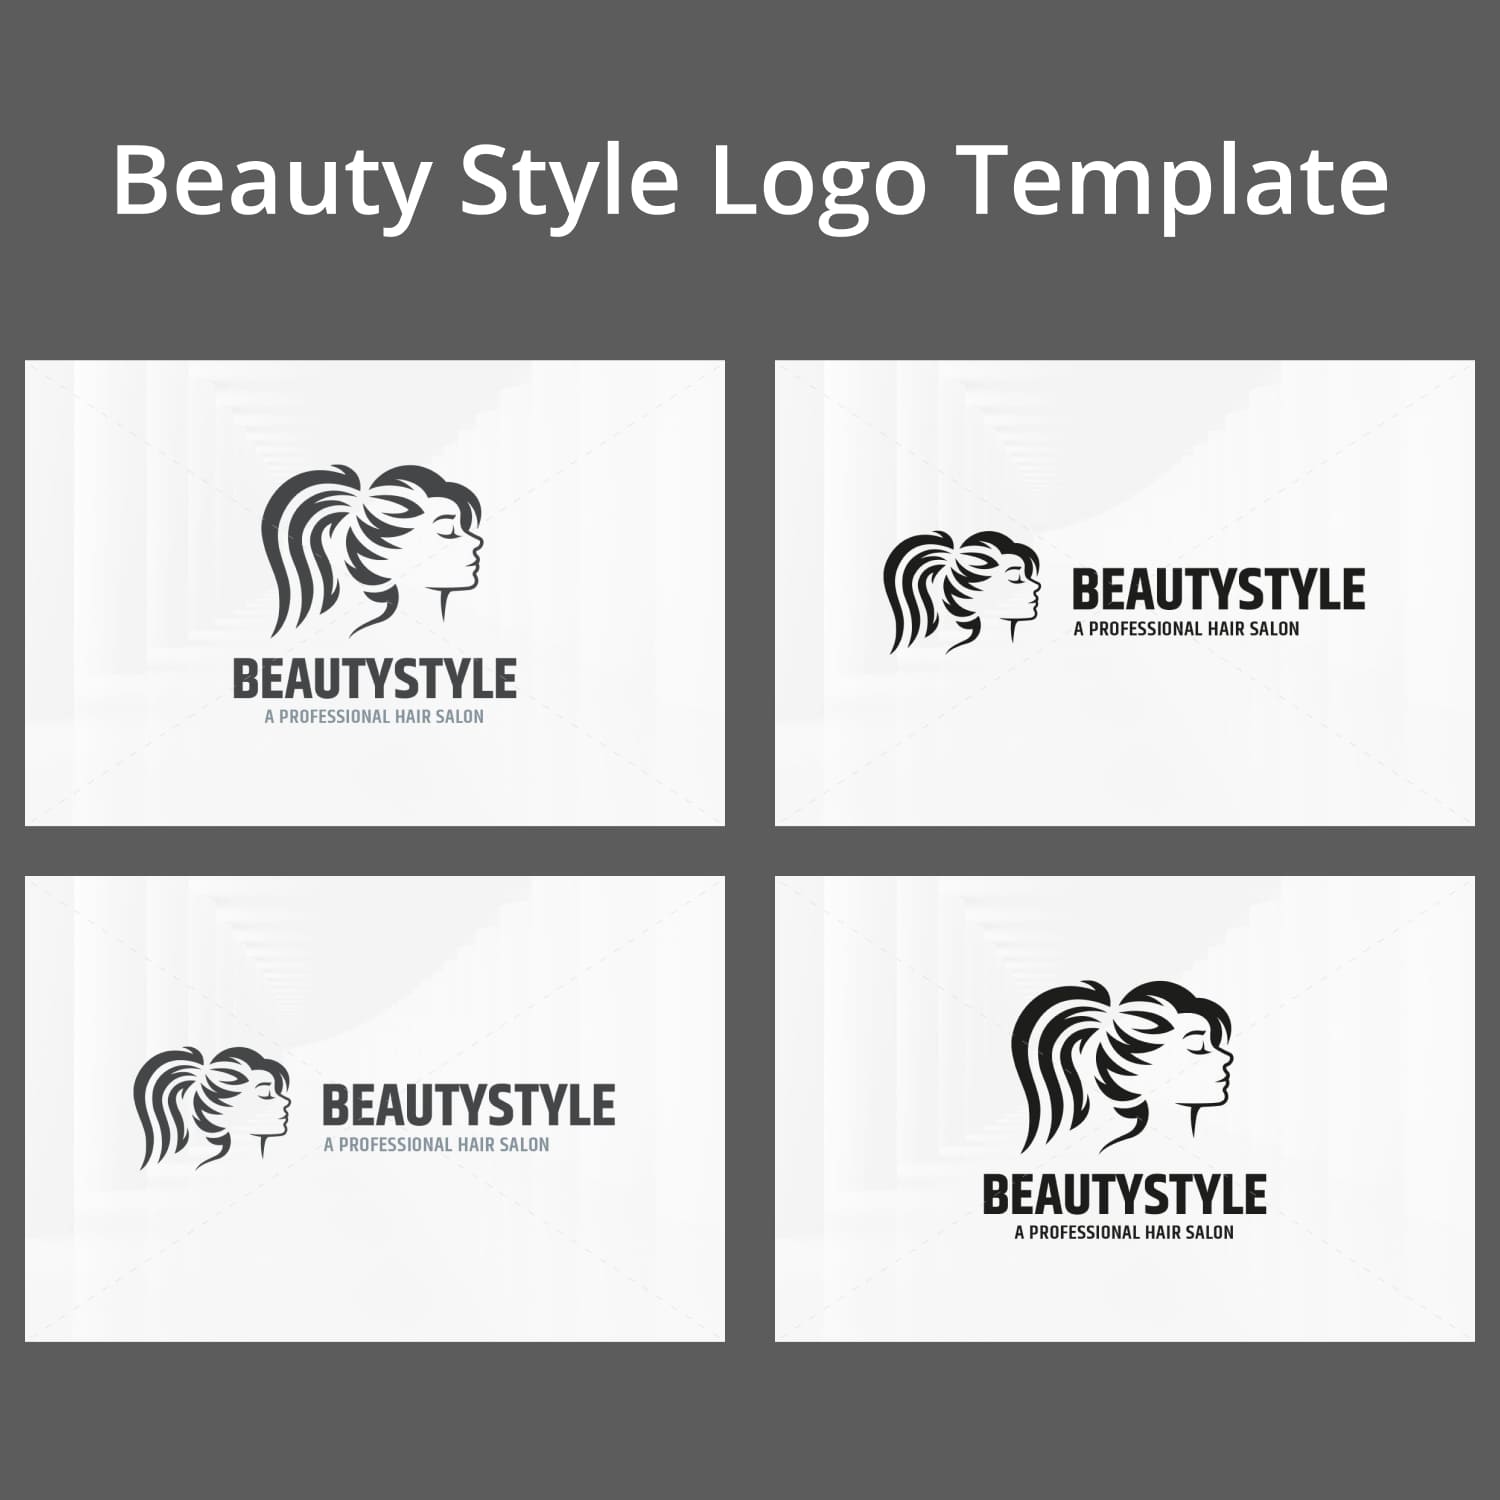 Beauty Style Logo Template - main image preview.